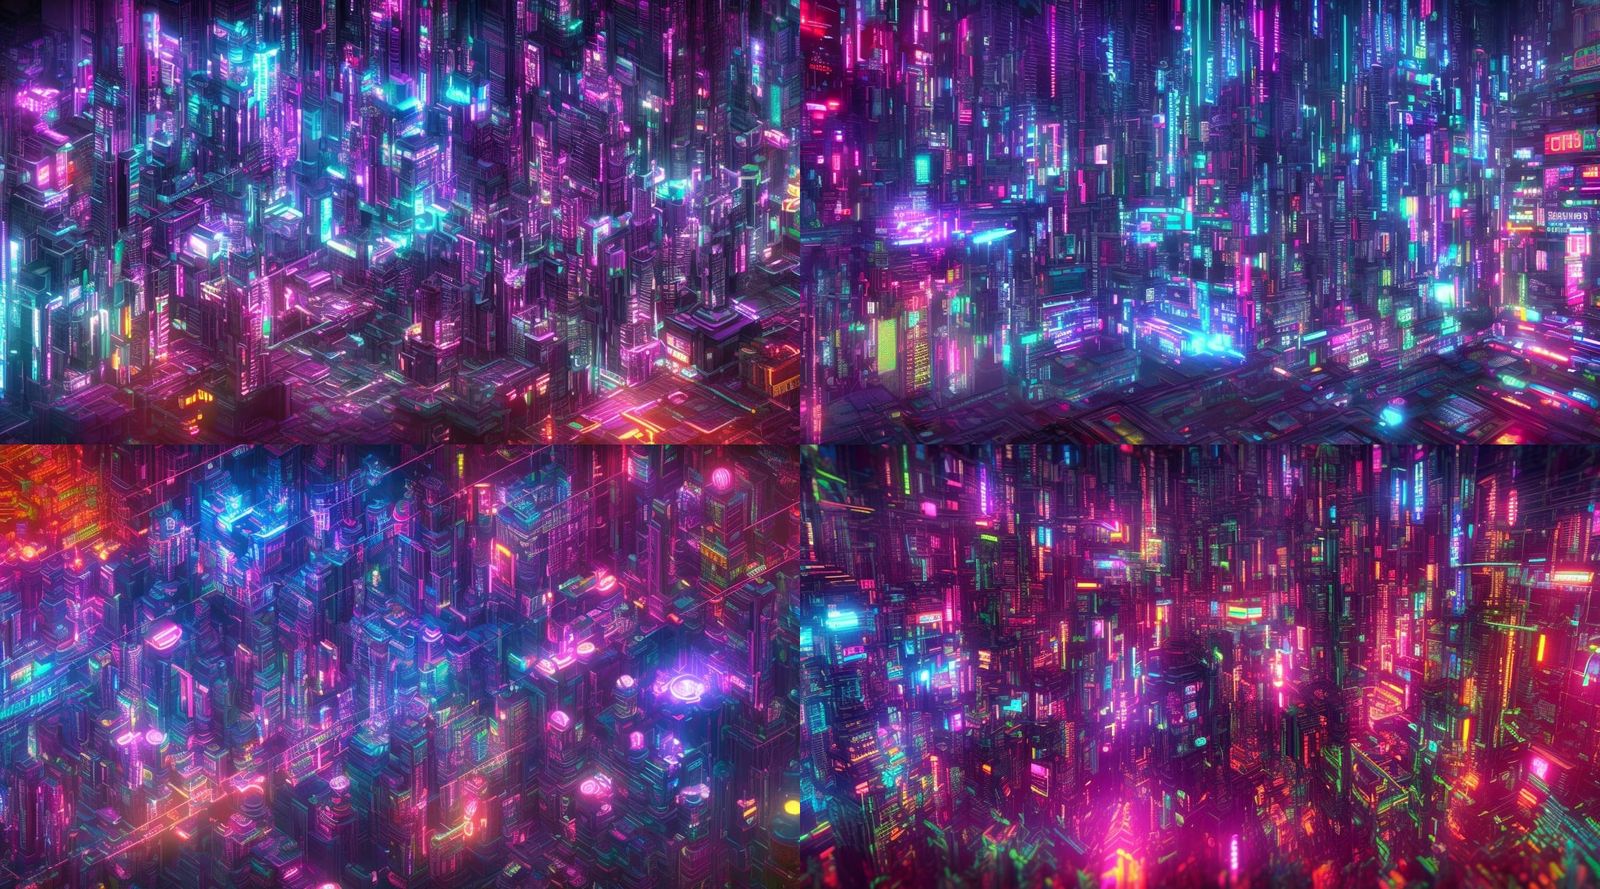 Abstract cyberpunk wallpaper with vibrant colors